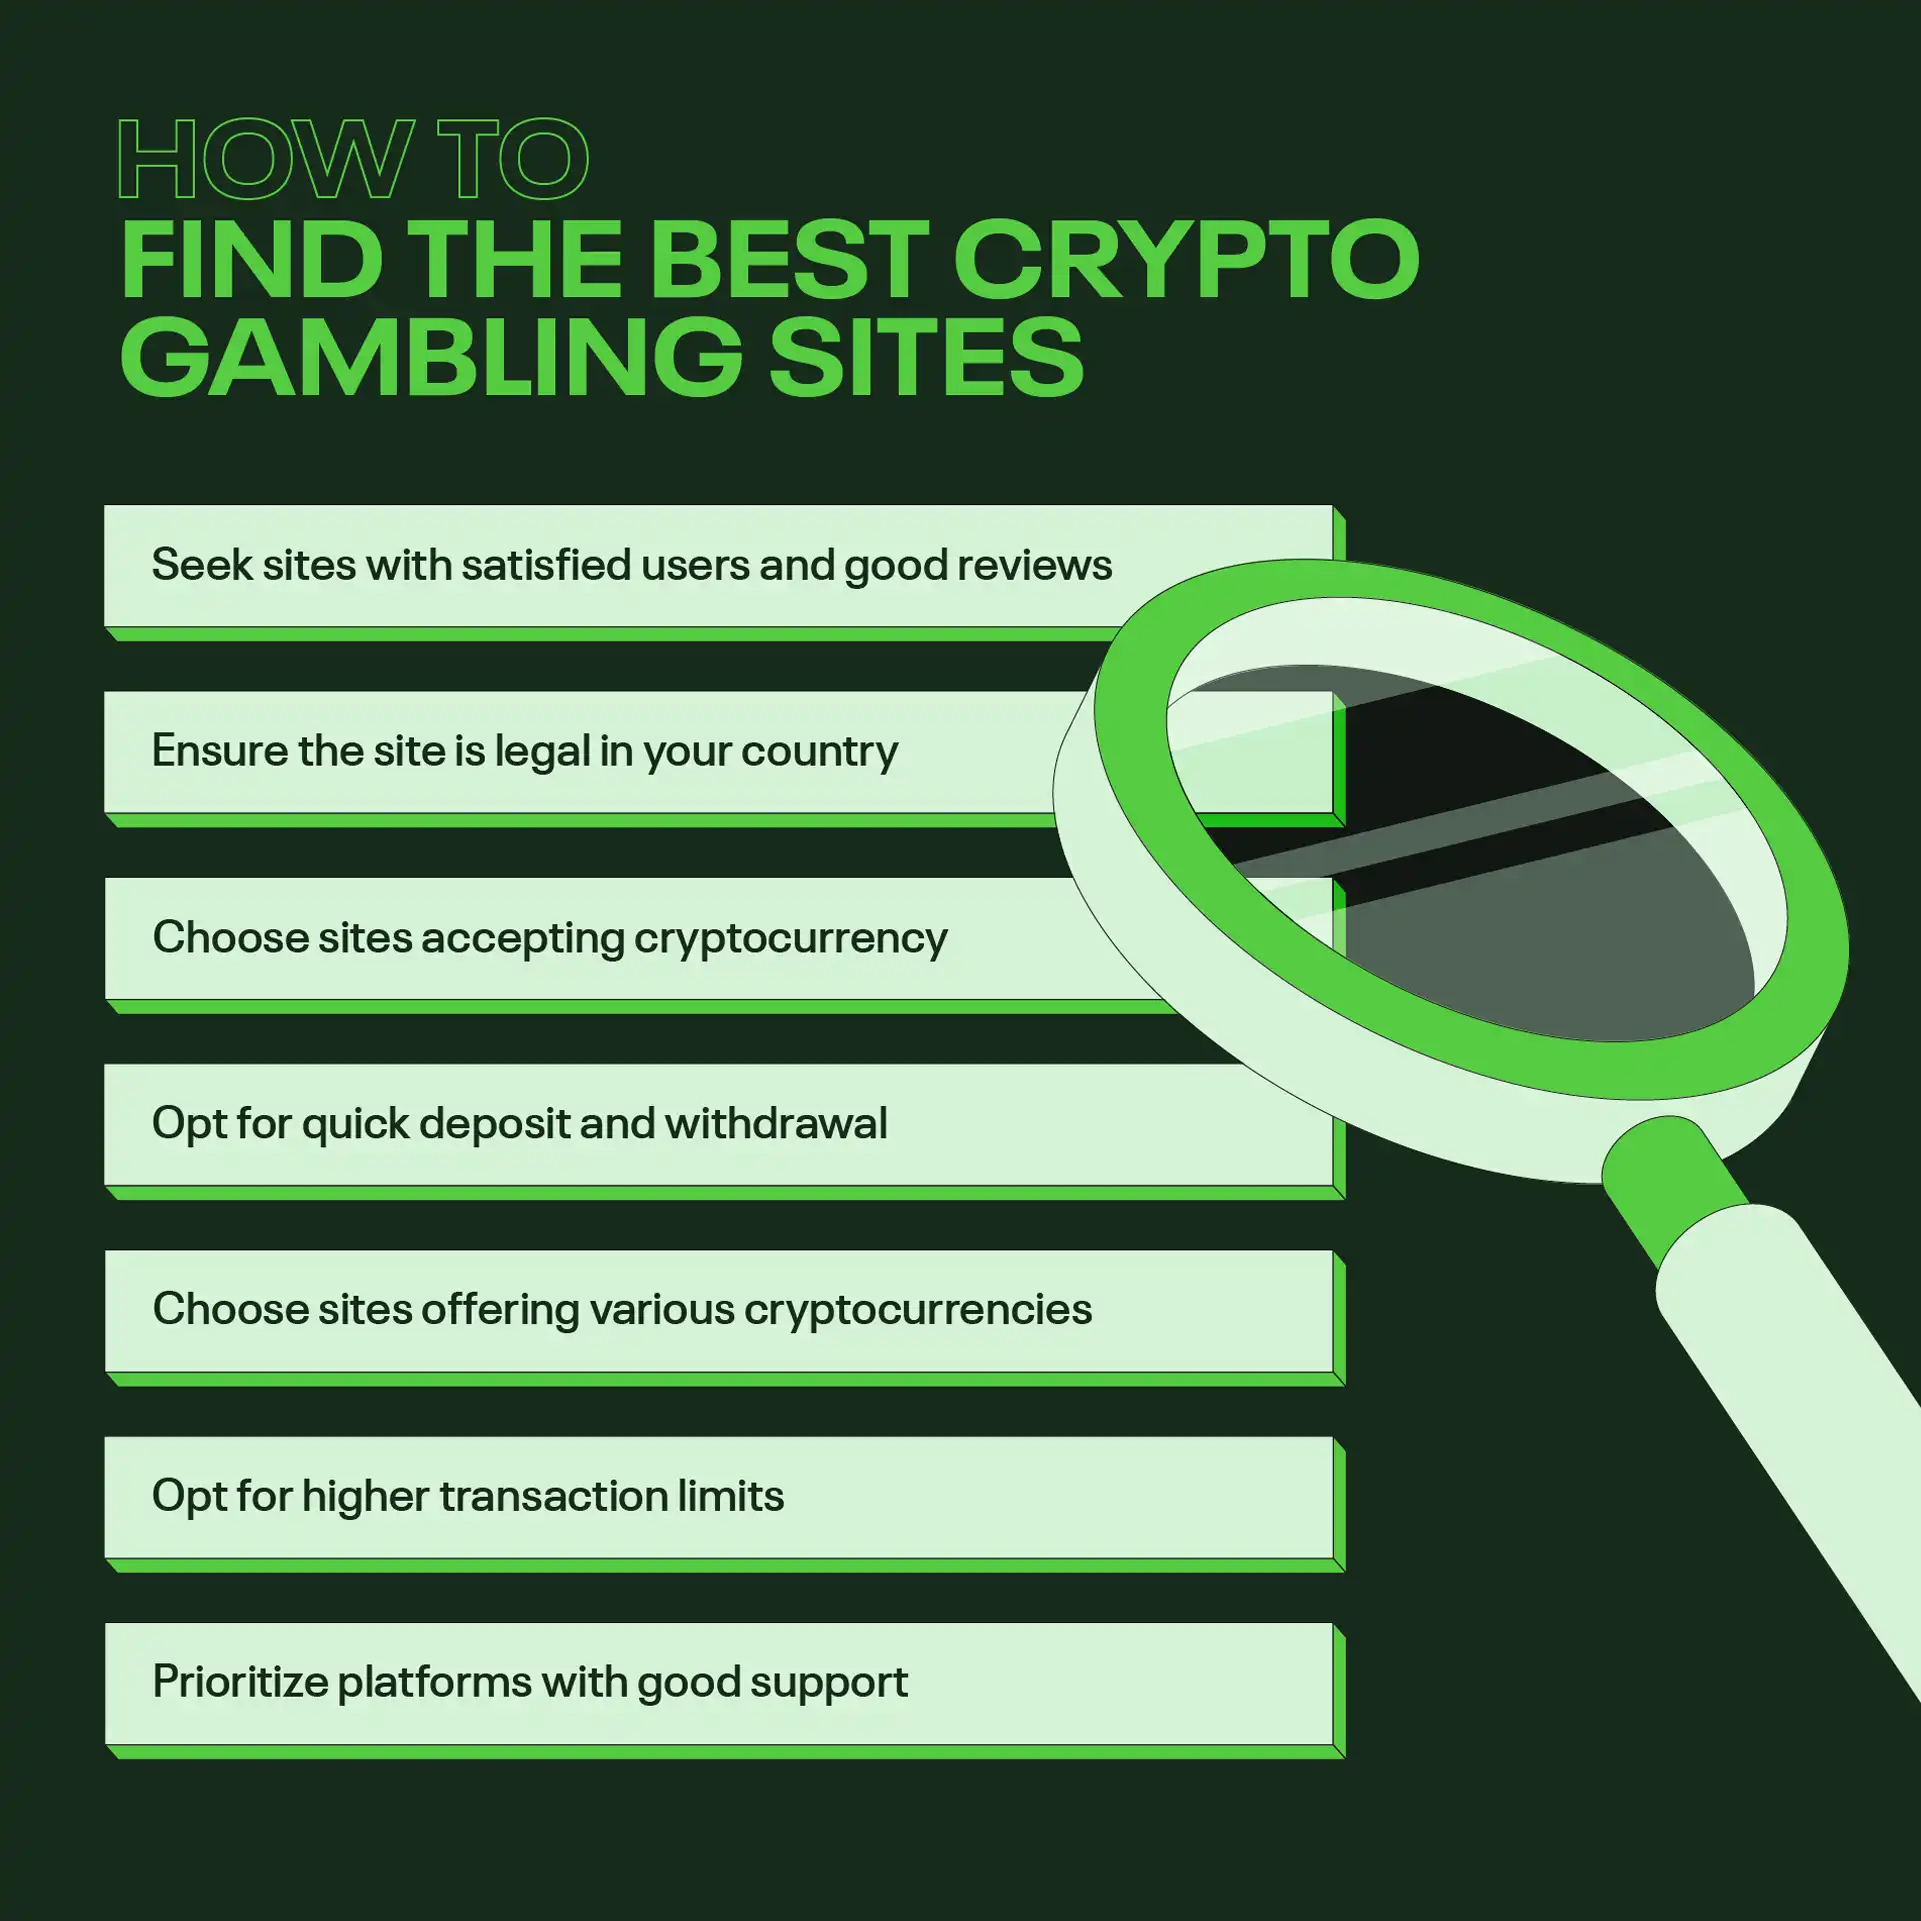 How to find the best crypto gambling sites